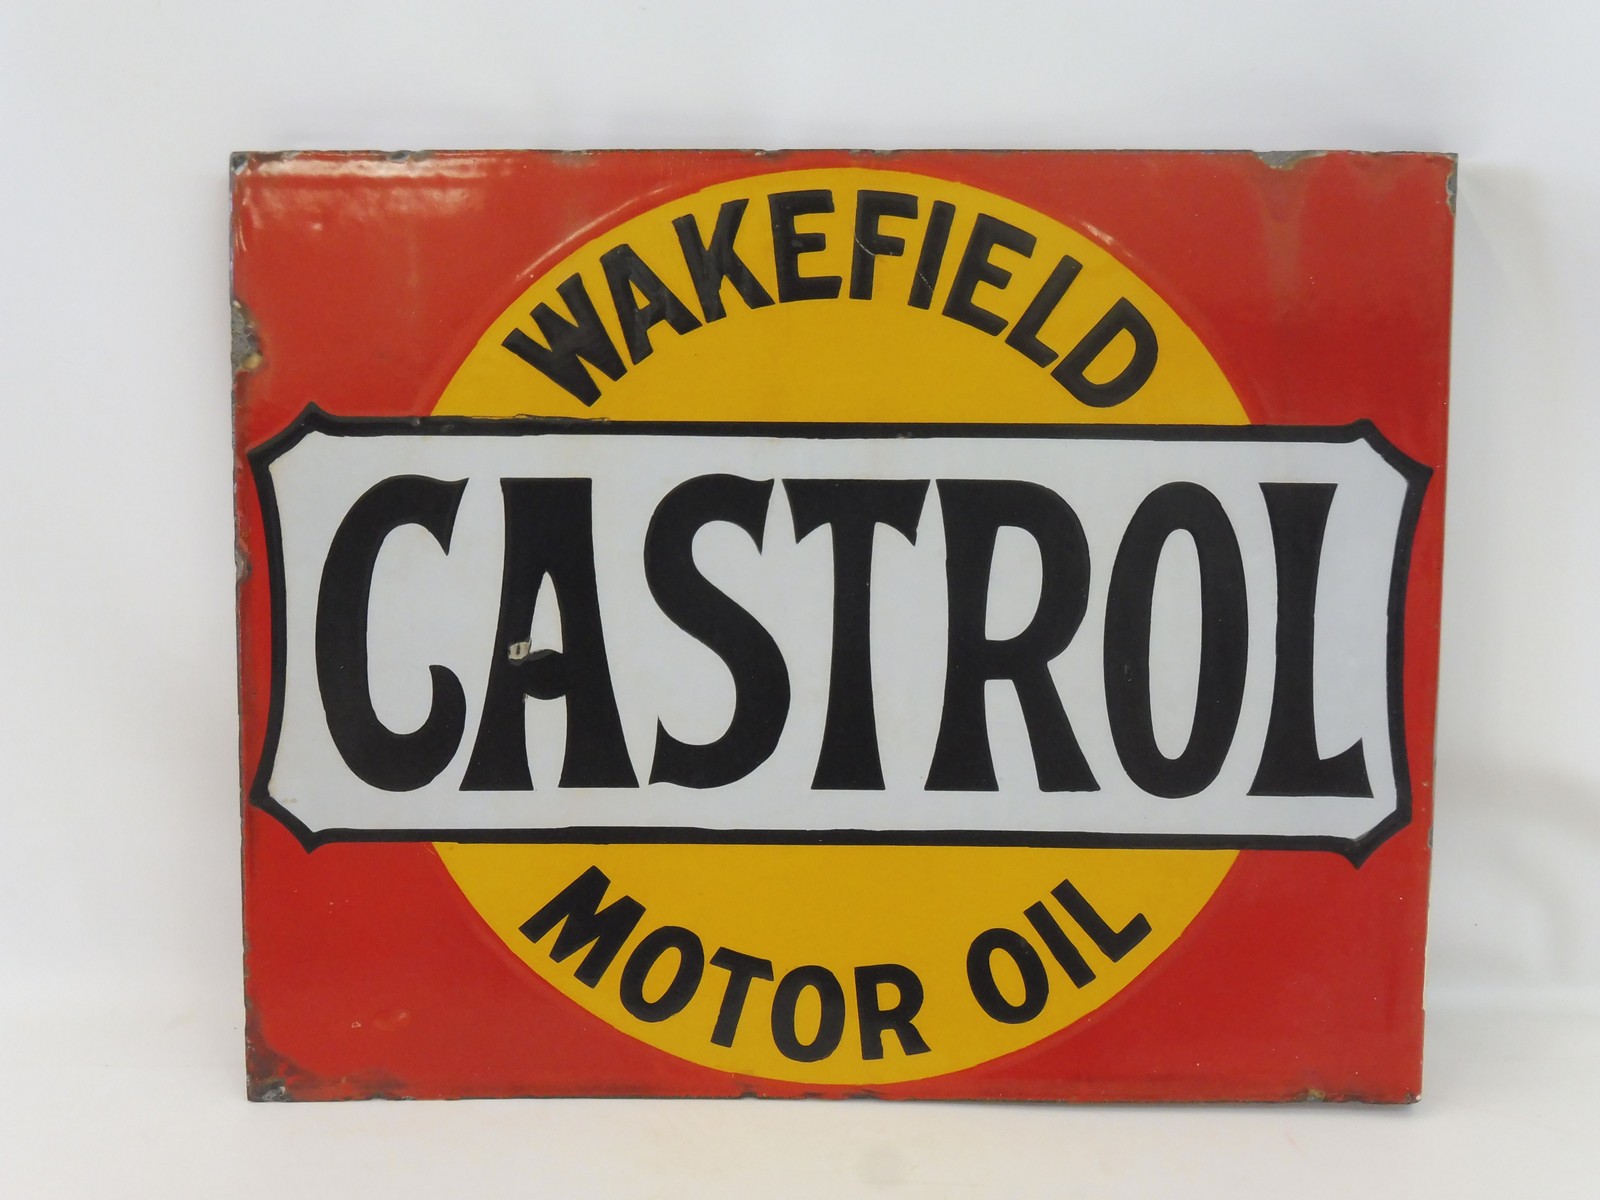 A Wakefield Castrol Motor Oil double sided enamel sign with hanging flange, in near mint - Image 2 of 2